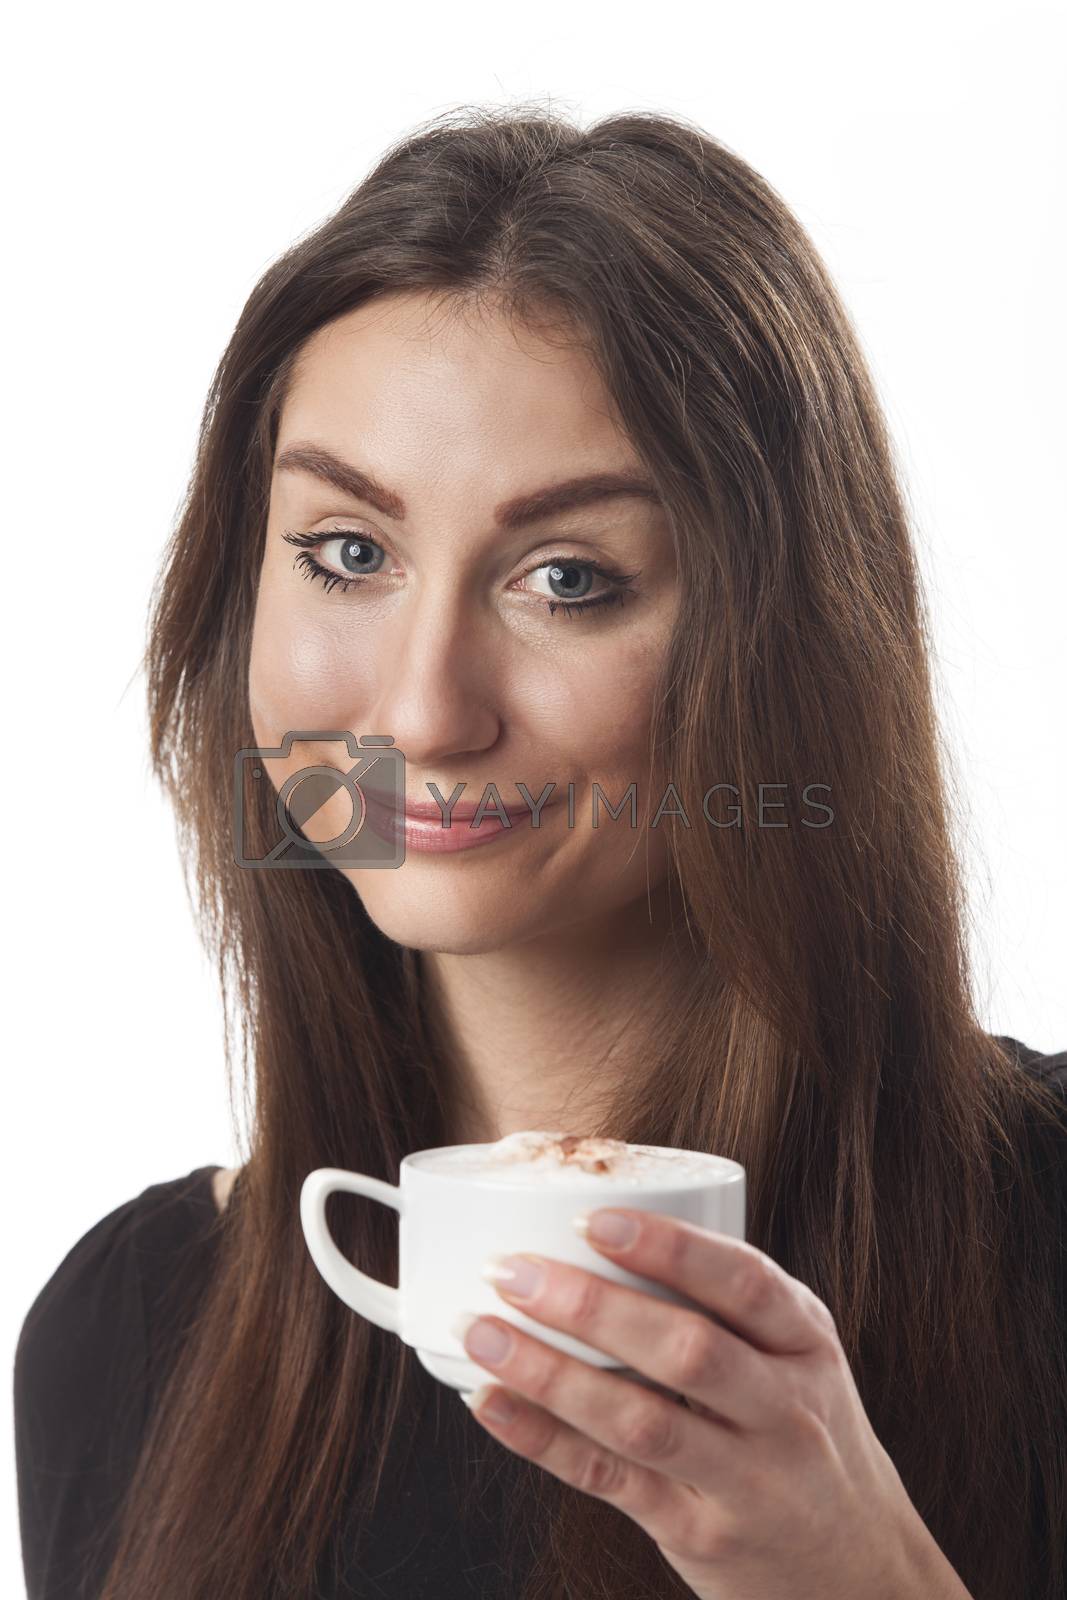 Royalty free image of smiling woman with a cappuchino  by bernjuer